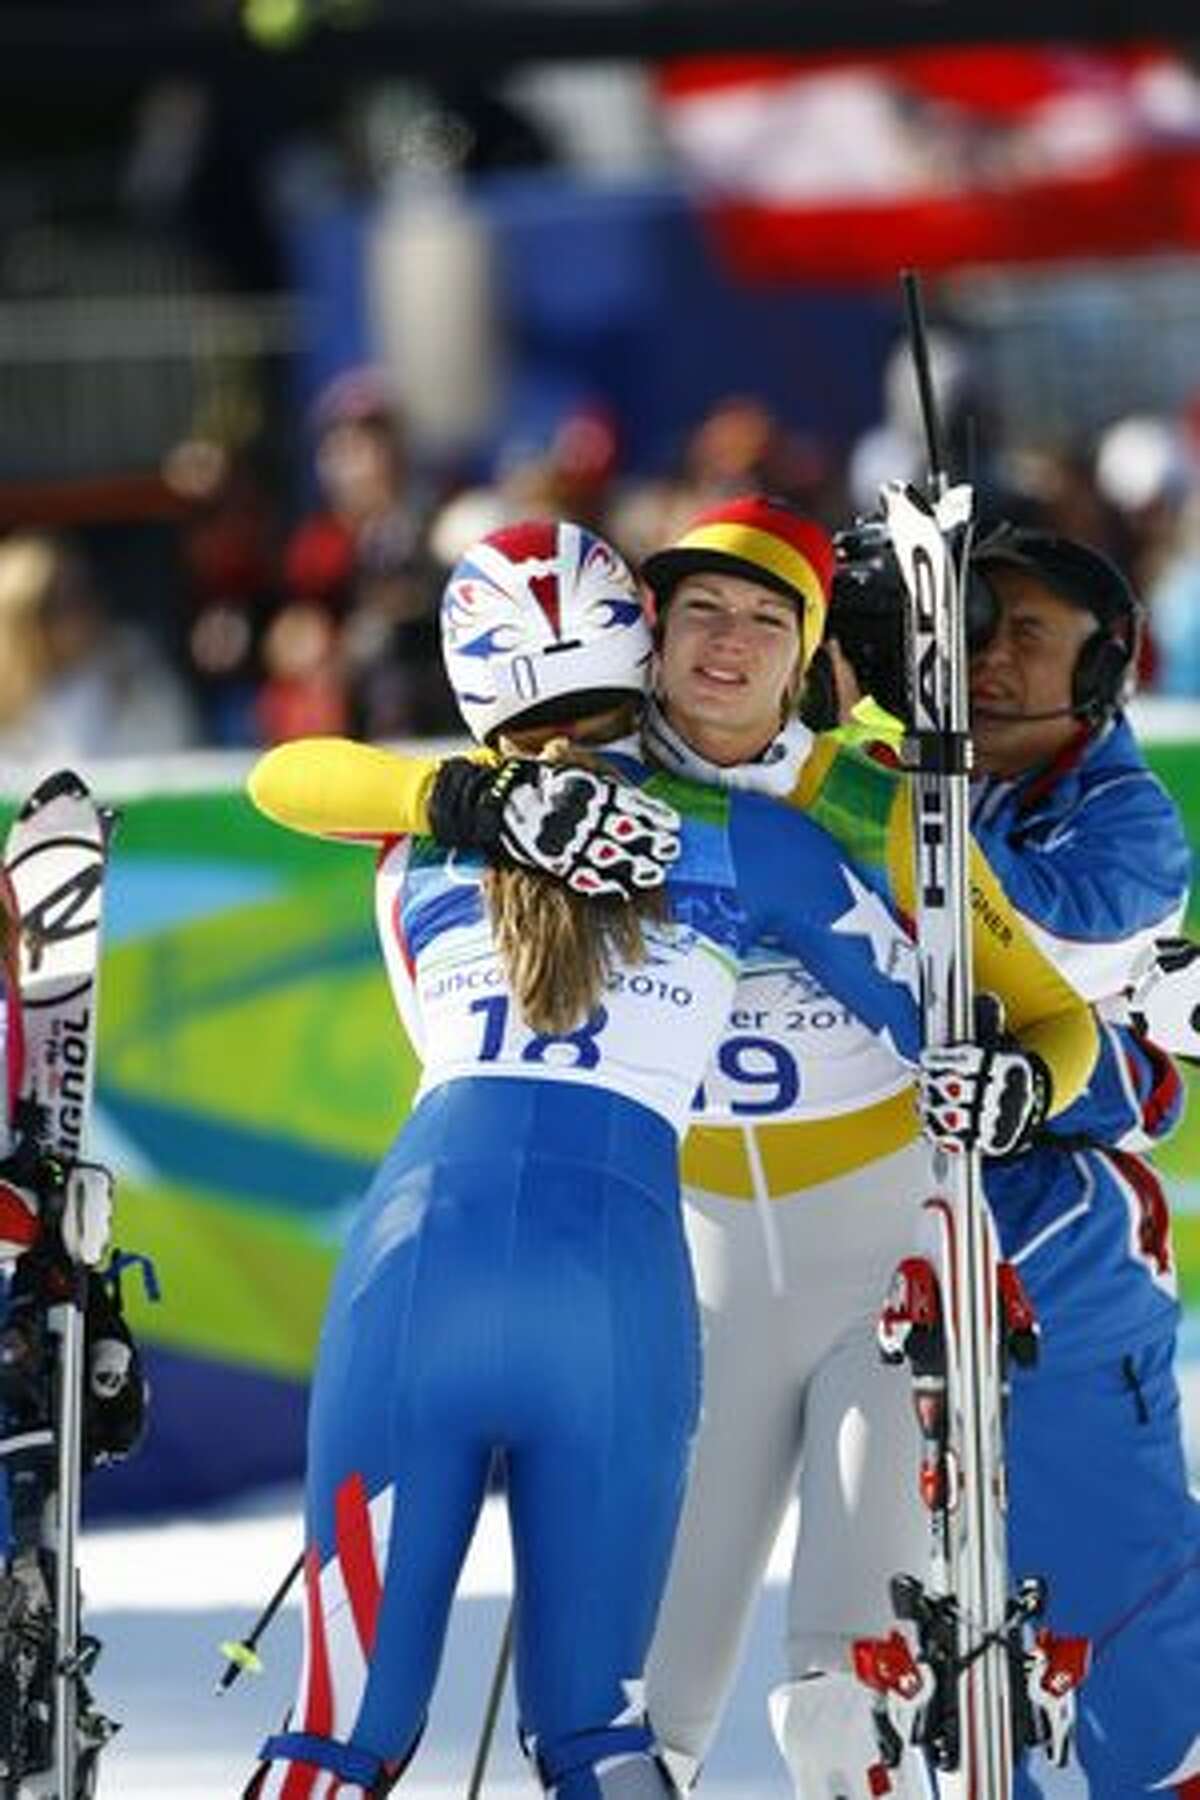 Following a crash during her slalom run, Lindsey Vonn graciously congratulates gold-medal winner Maria Riesch of German. After setting the pace for the field with her downhill run earlier in the day, Lindsey Vonn crashed within sight of the finish line during the slalom portion of the womens super combined event to ruin her chances at medals in back-to-back events at Whistler Creekside at the 2010 Winter Olympic Games on Thursday, Feb. 18, 2010, in Vancouver. ( Jay Hu / For the Houston Chronicle during the slalom portion of the womens super combined event at Whistler Creekside at the 2010 Winter Olympic Games on Thursday, Feb. 18, 2010, in Vancouver. ( Jay Hu / For the Houston Chronicle ).